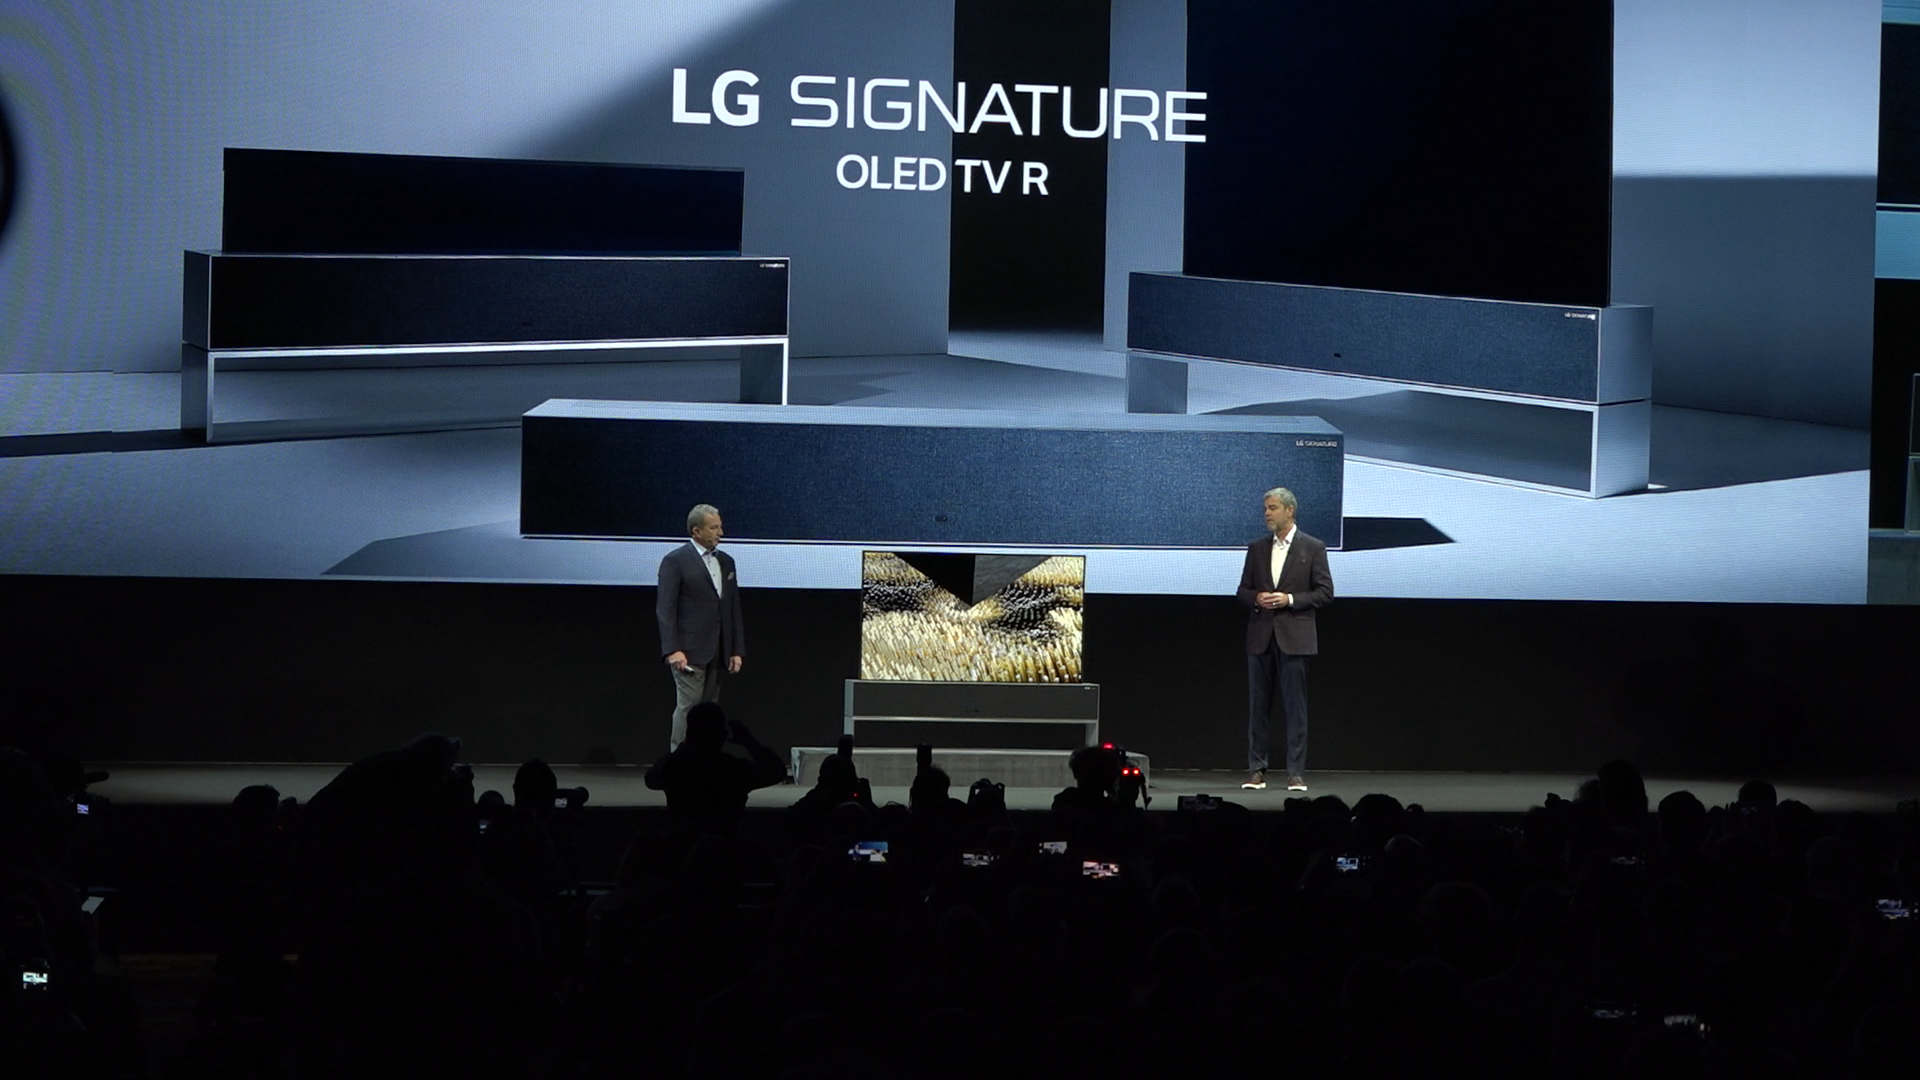 LG unveils their latest in home entertainment and appliances at CES 2019